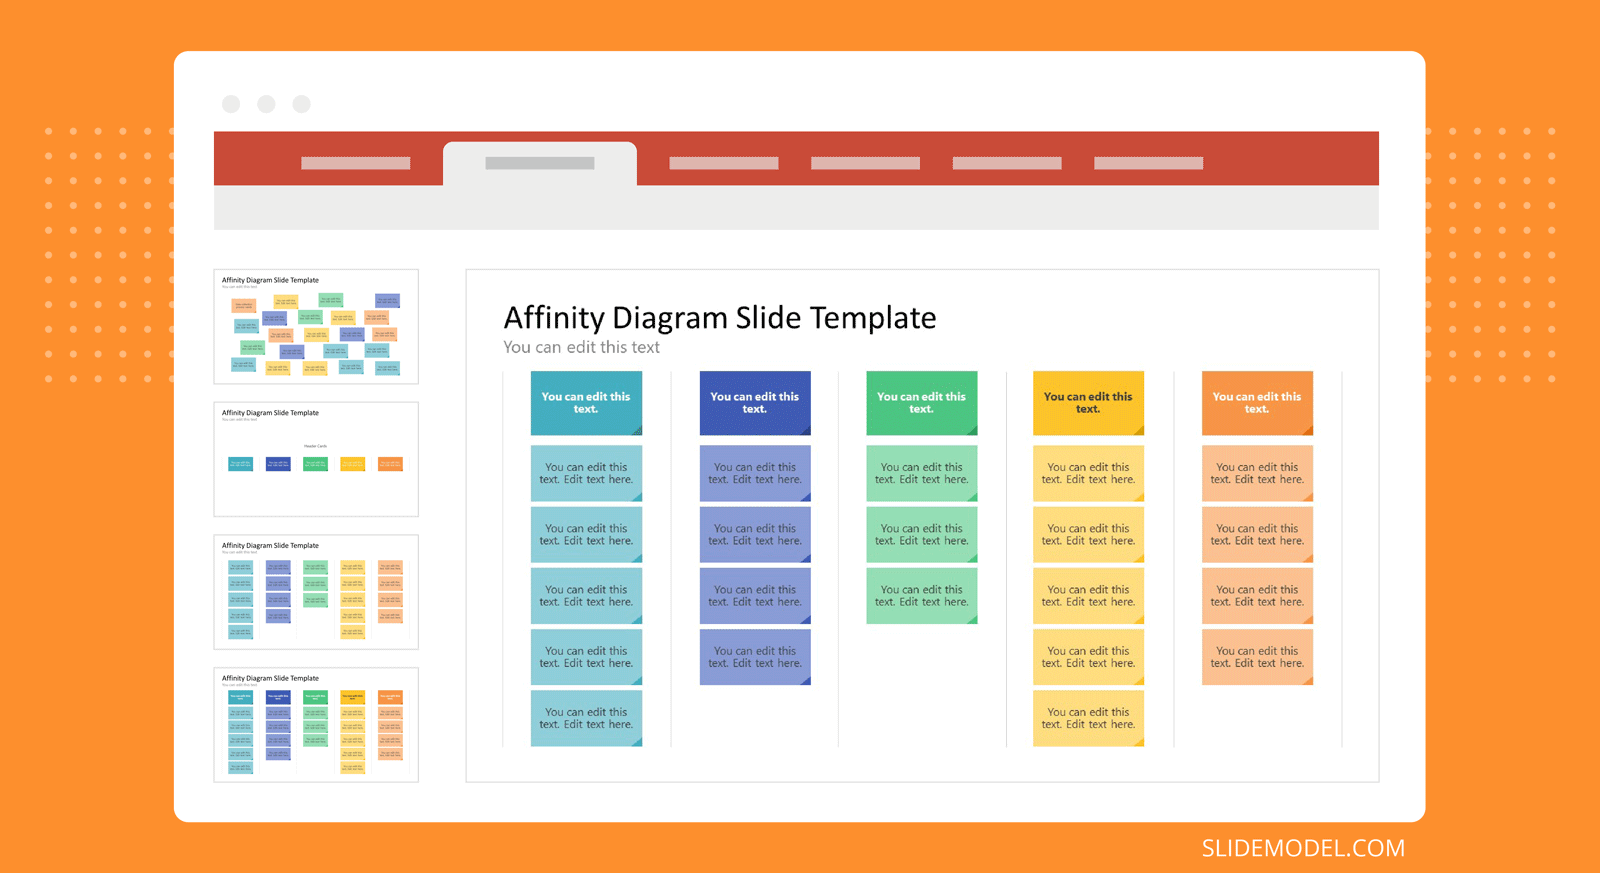 Uses of Affinity Diagrams